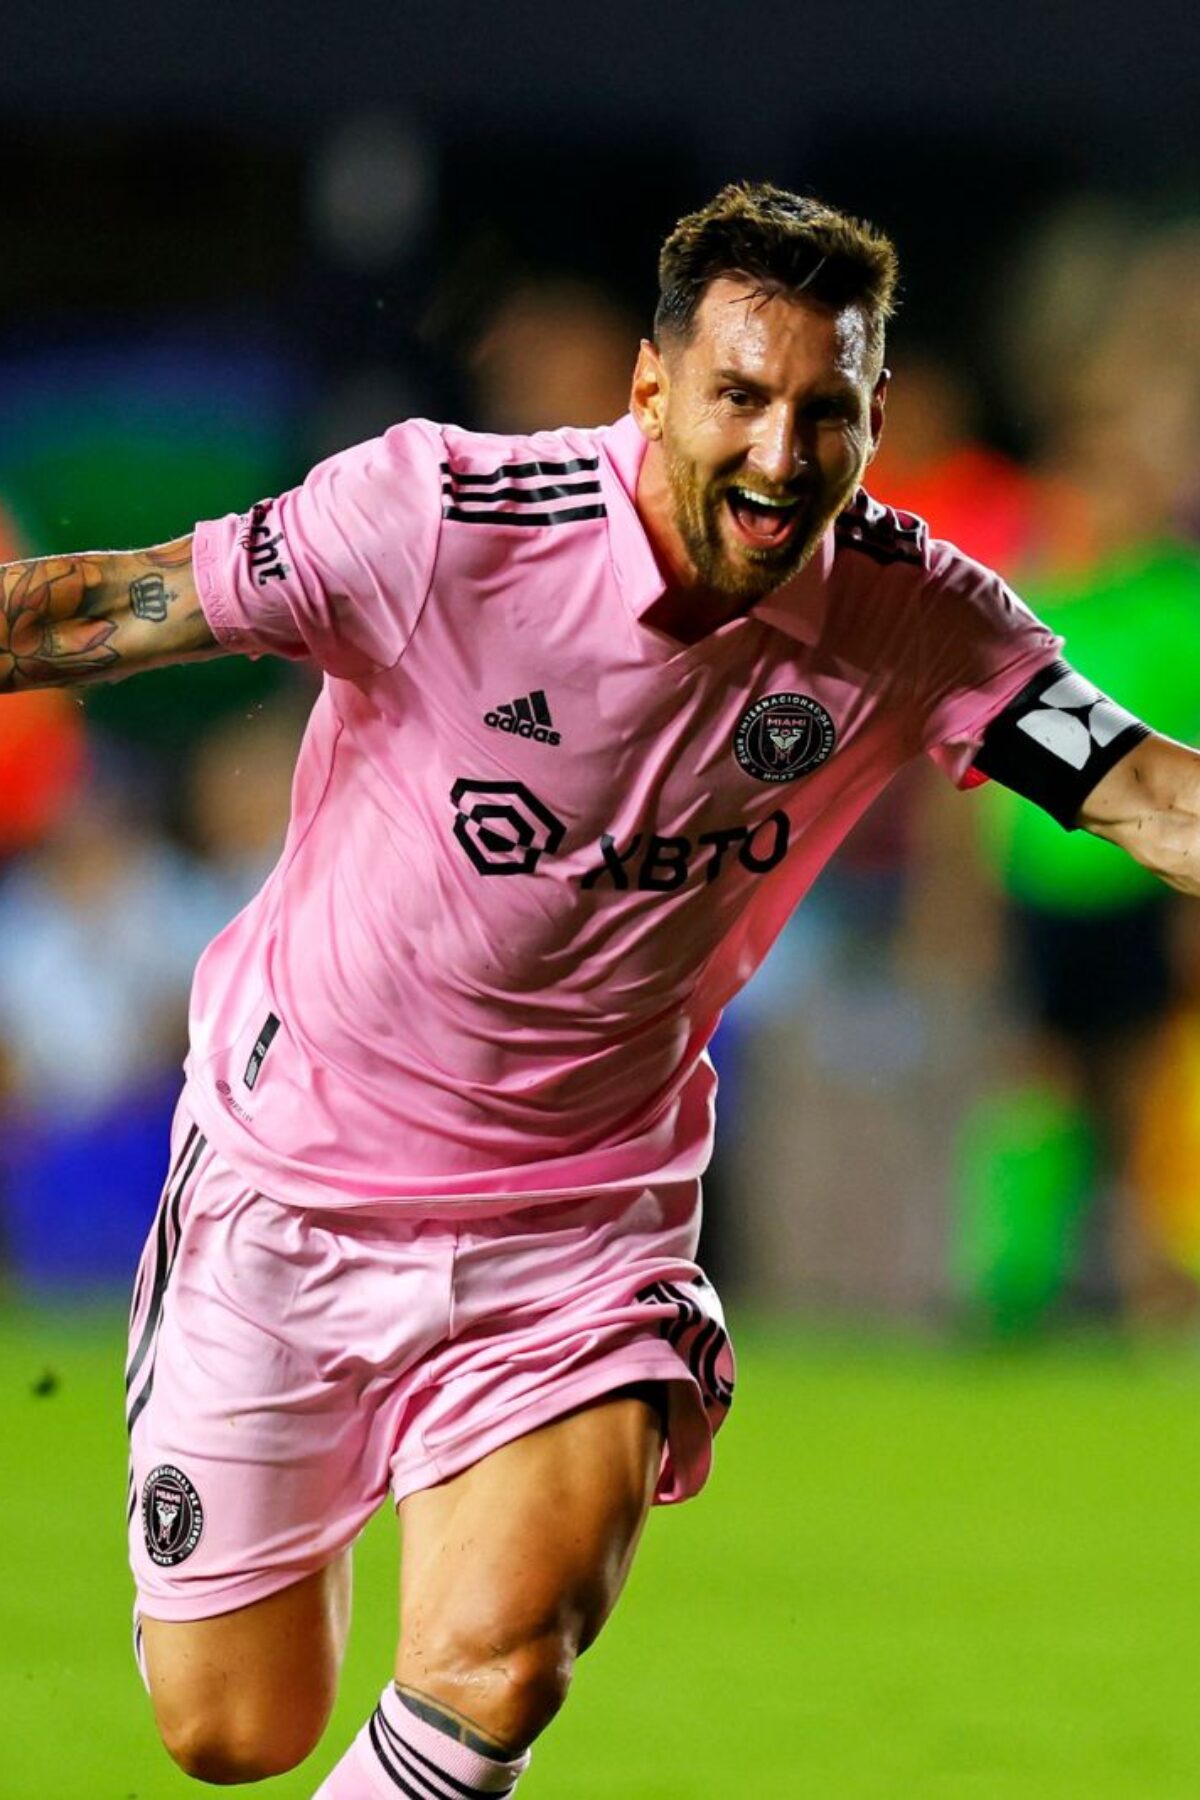 FORT LAUDERDALE, FLORIDA - JULY 21: Lionel Messi #10 of Inter Miami CF celebrates after kicking the game winning goal during the second half of the Leagues Cup 2023 match between Cruz Azul and Inter Miami CF at DRV PNK Stadium on July 21, 2023 in Fort Lauderdale, Florida. (Photo by Mike Ehrmann/Getty Images)